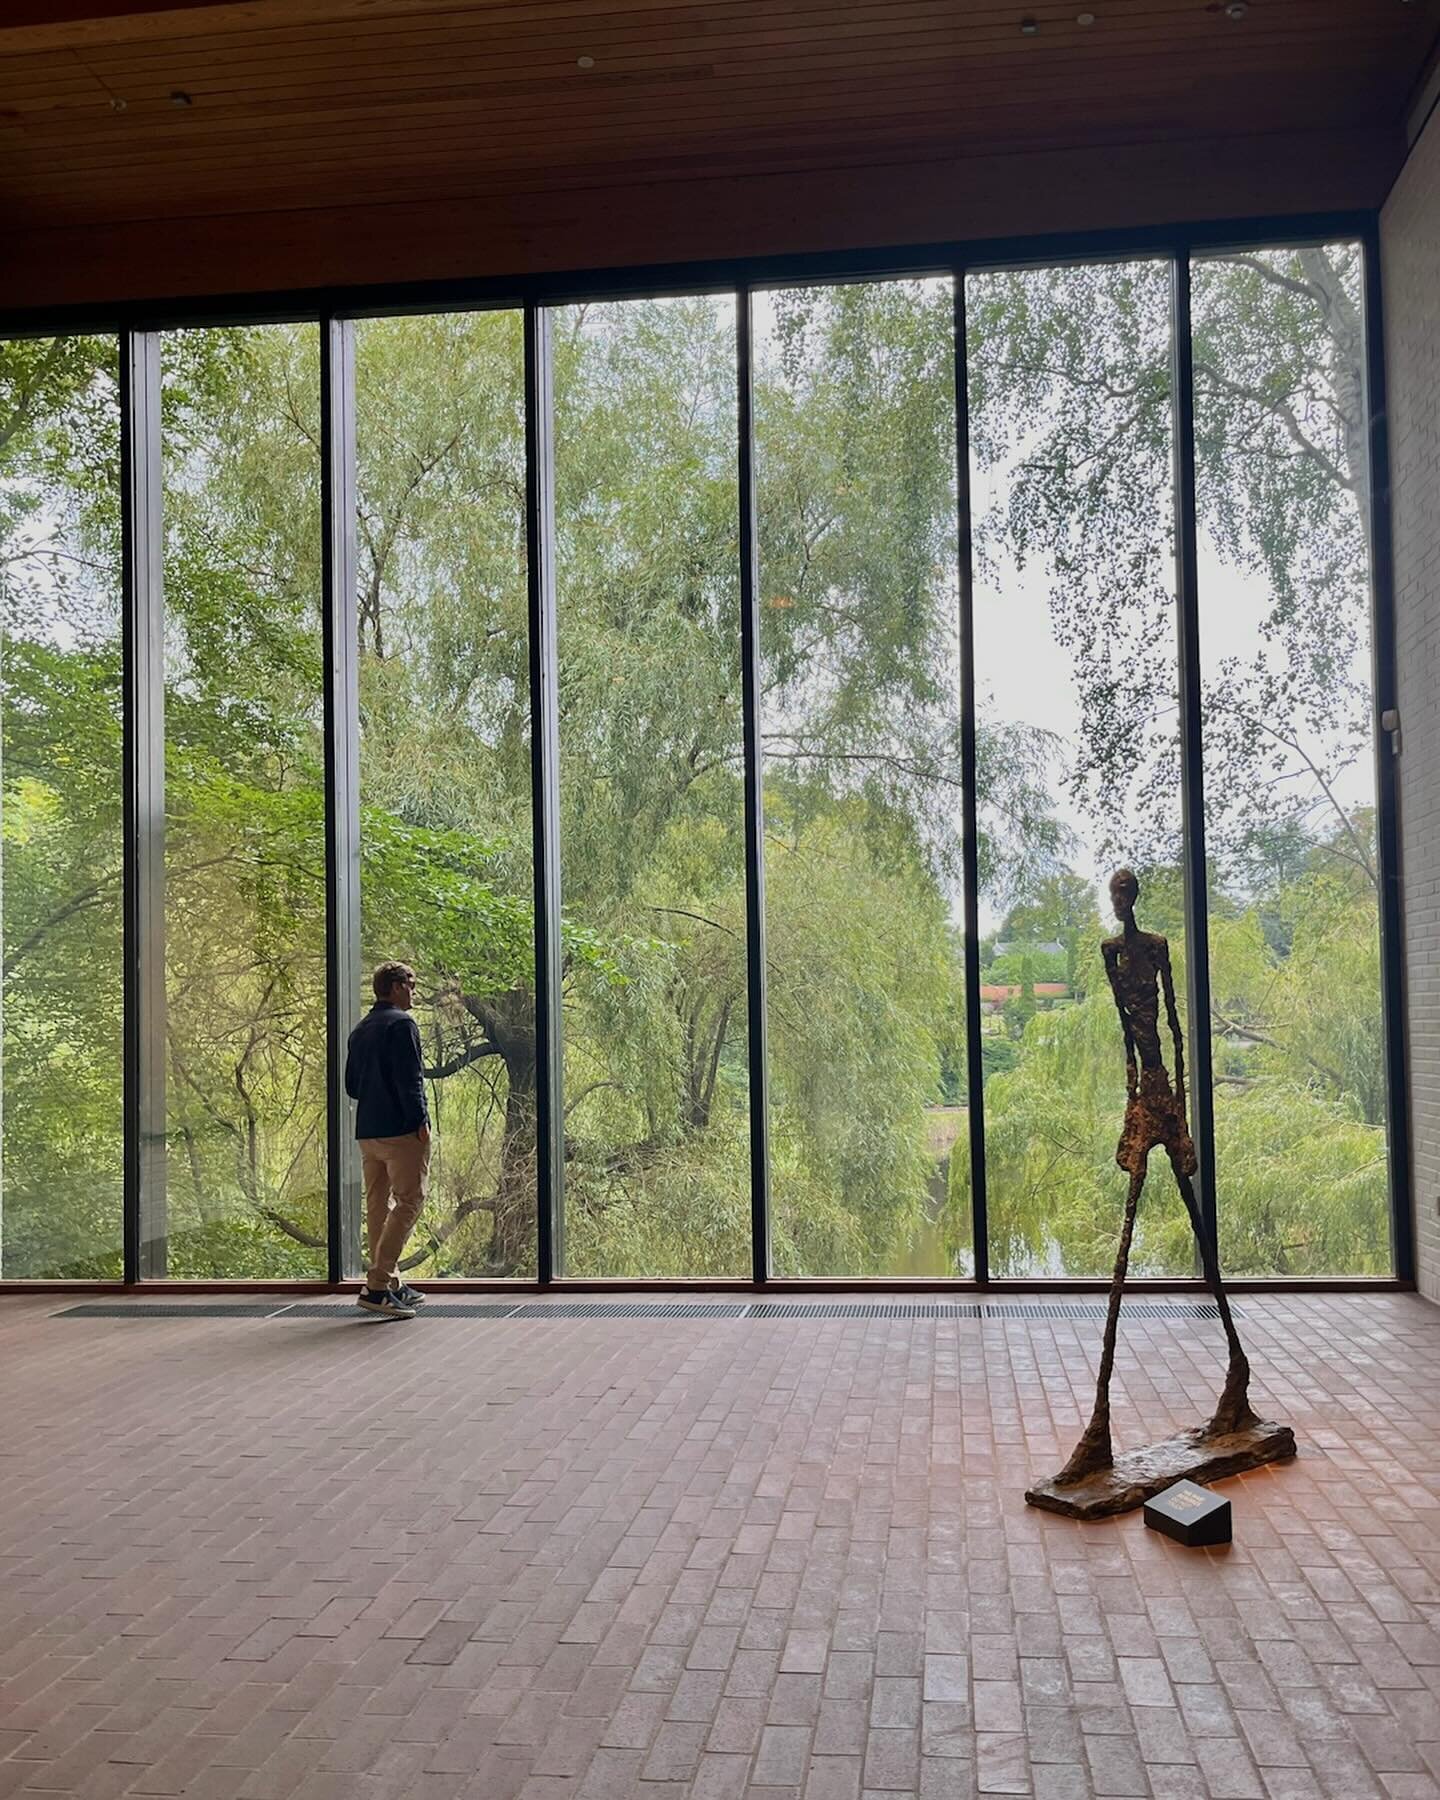 An inspiring visit to the Louisanna Museum of Modern Art in Humleb&aelig;k, Denmark last week. Truly a room with a view.

#jasongoodarchitecture #architecture #danisharchitecture #contemporaryarchitecture #naturalmaterials #louisianamuseum #louisiana